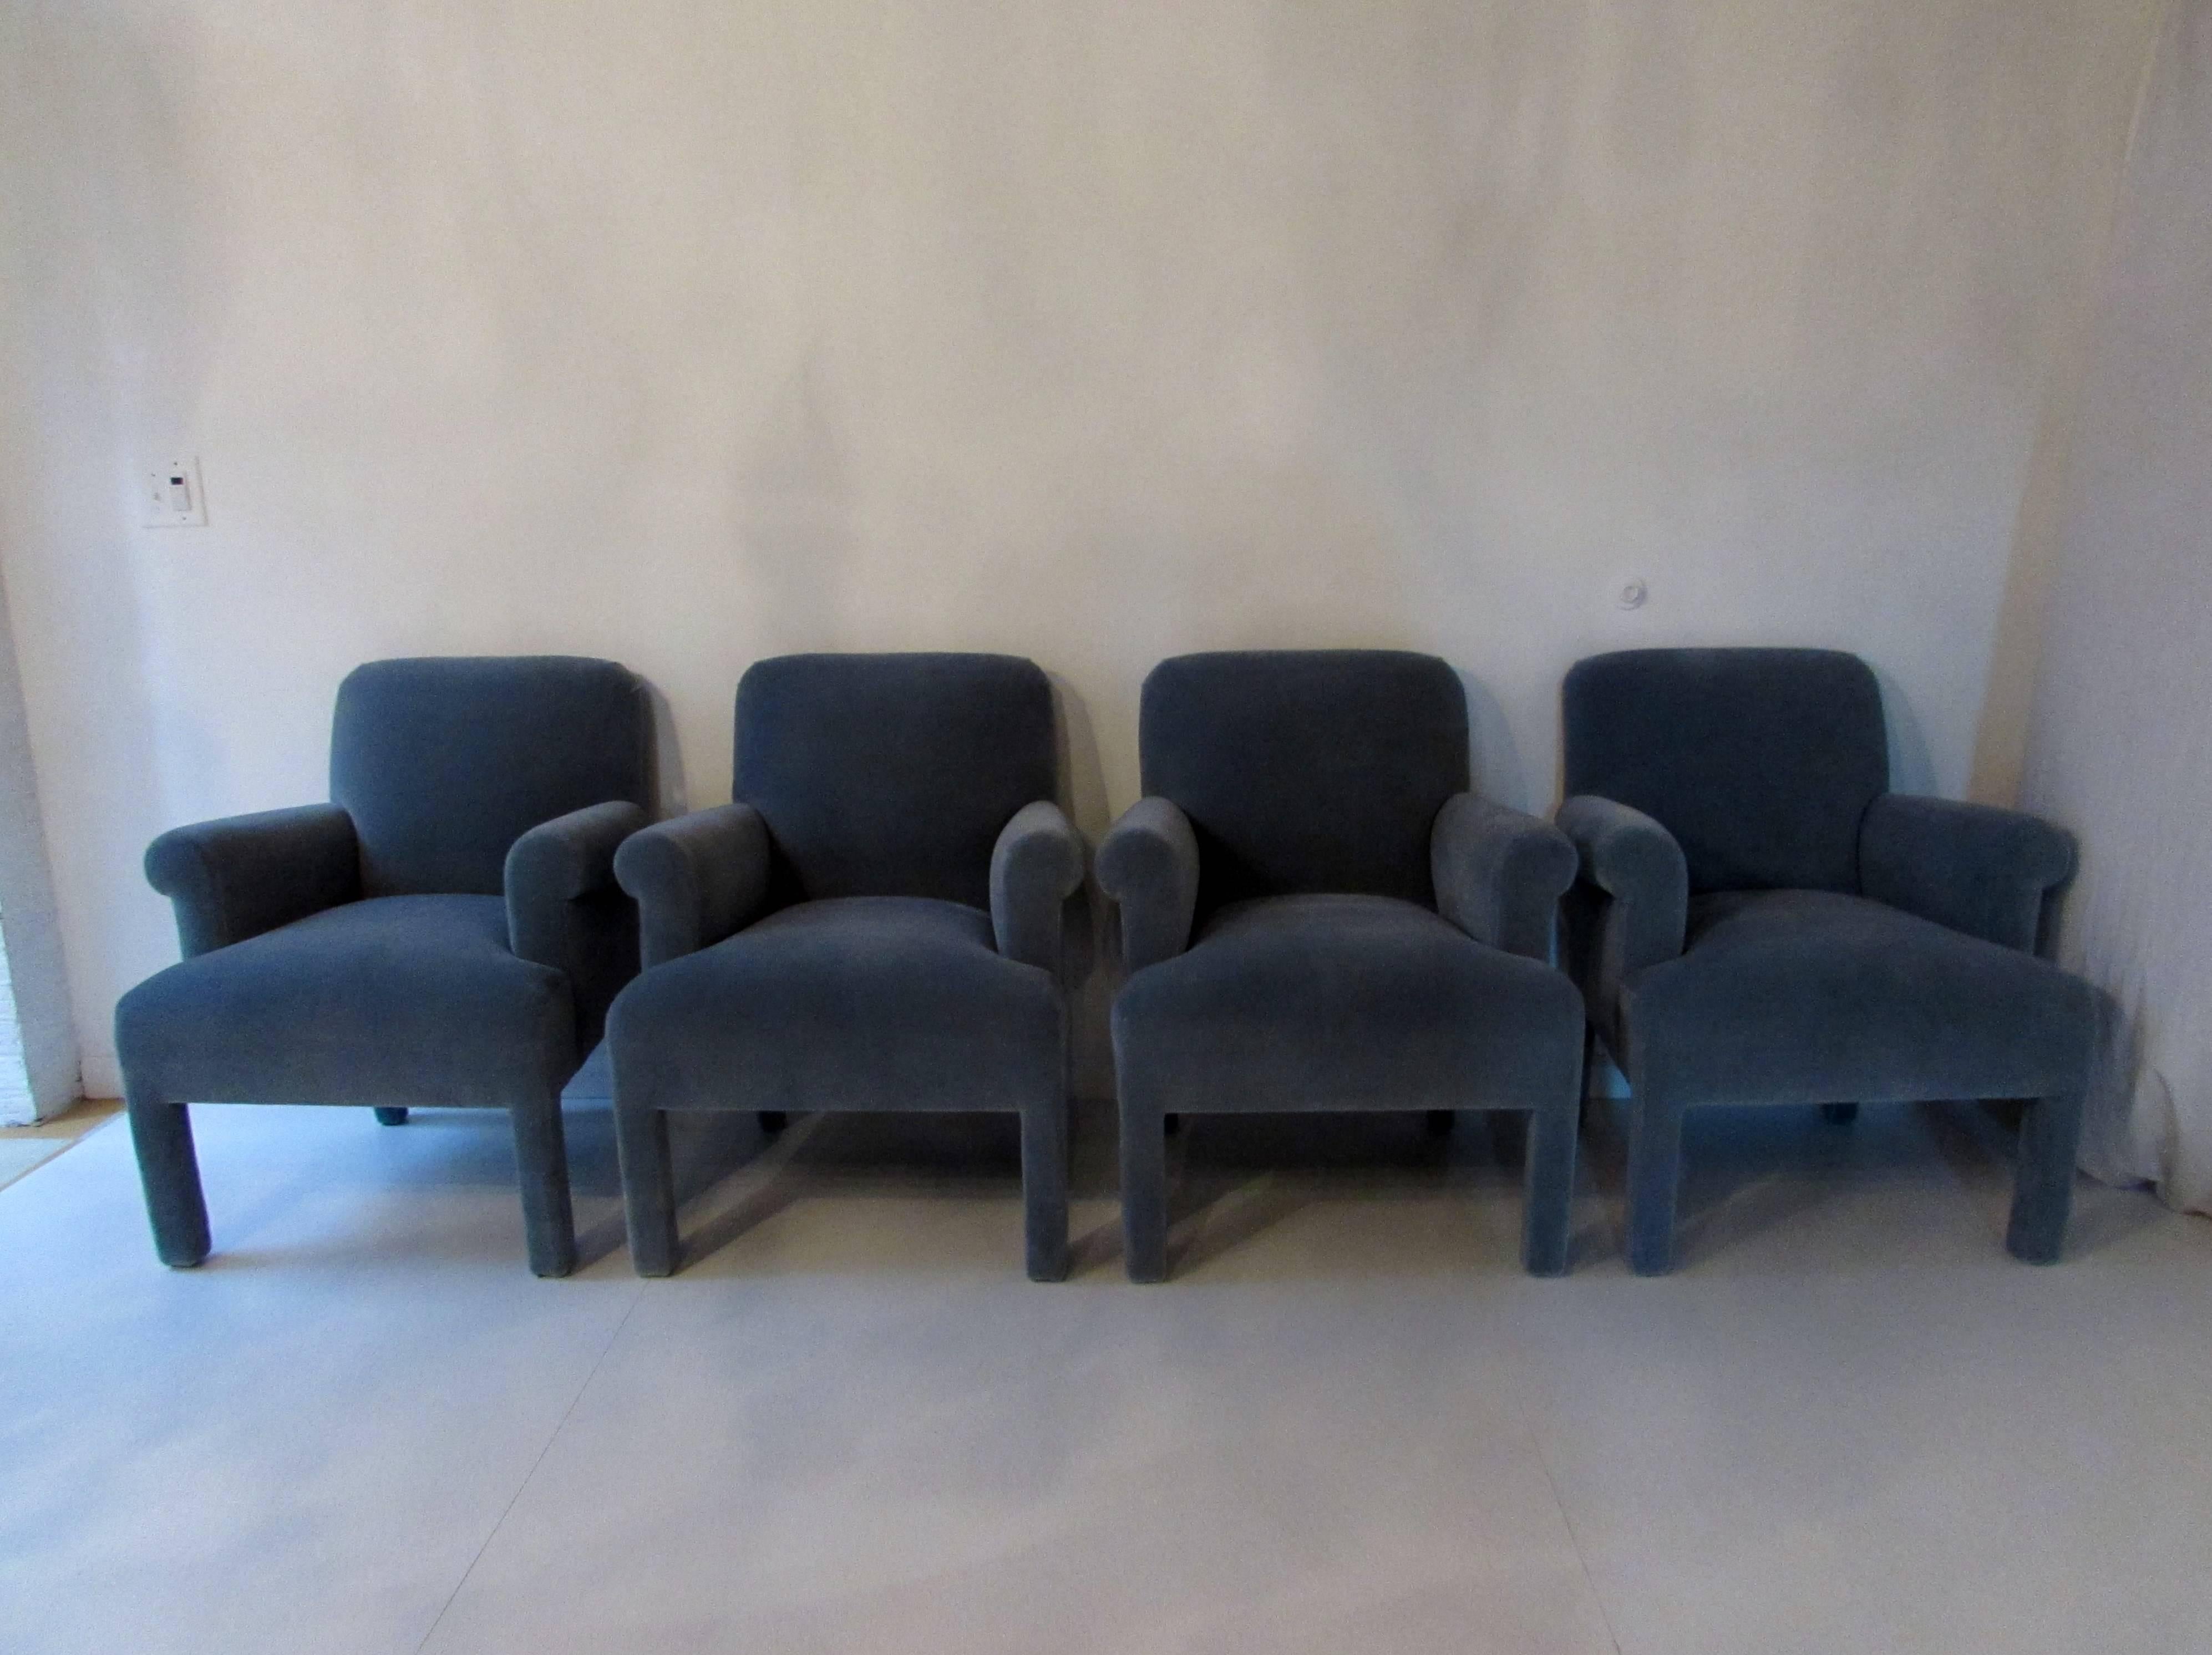 Superb set of four Armchairs designed by Angelo Donghia in the 1980s. Newly upholstered in seafoam blue mohair. Excellent restored condition. Seat, 20